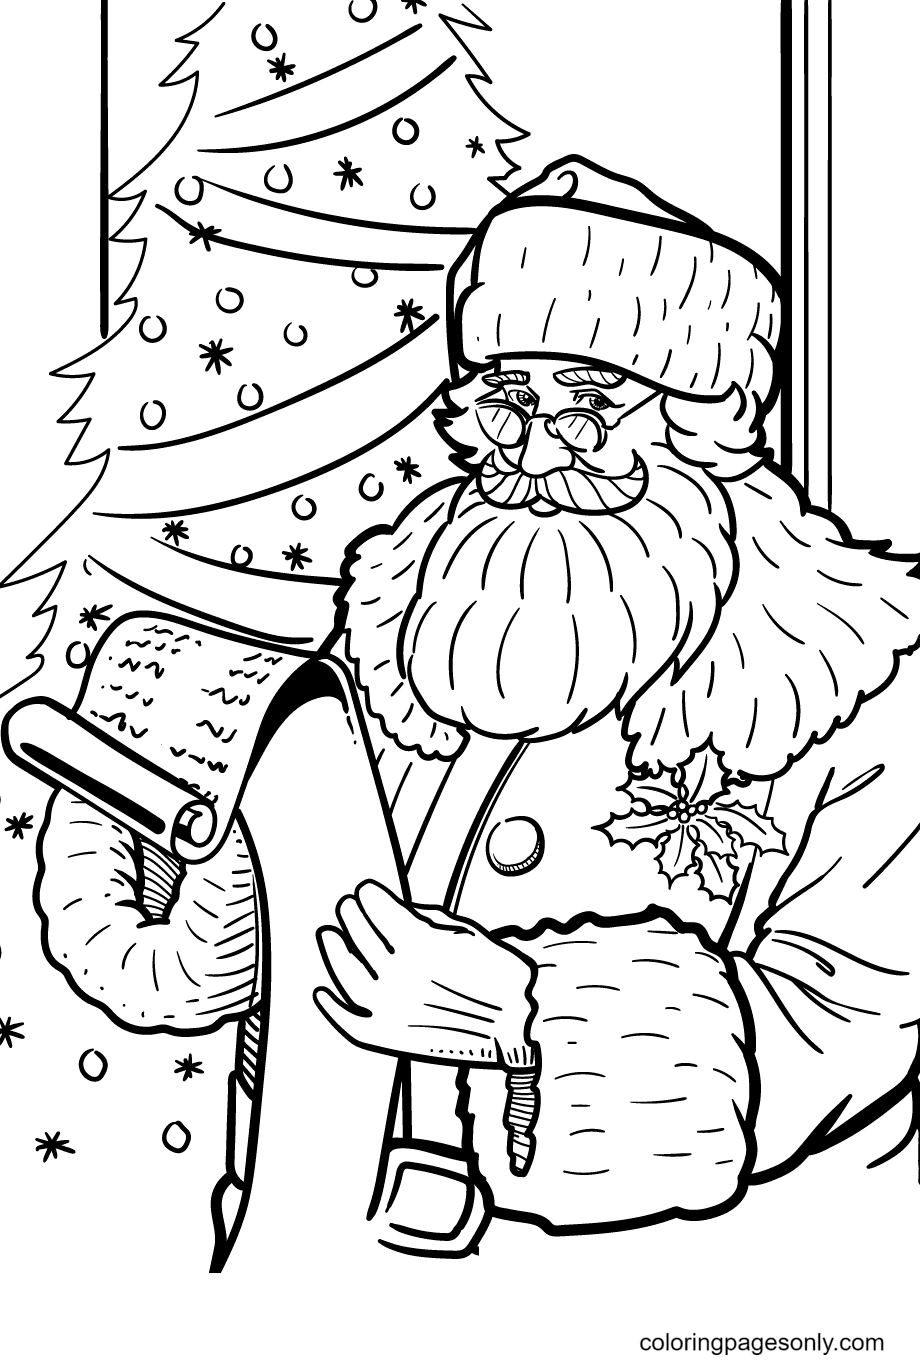 Santa Claus is Checking the Gift List Coloring Page